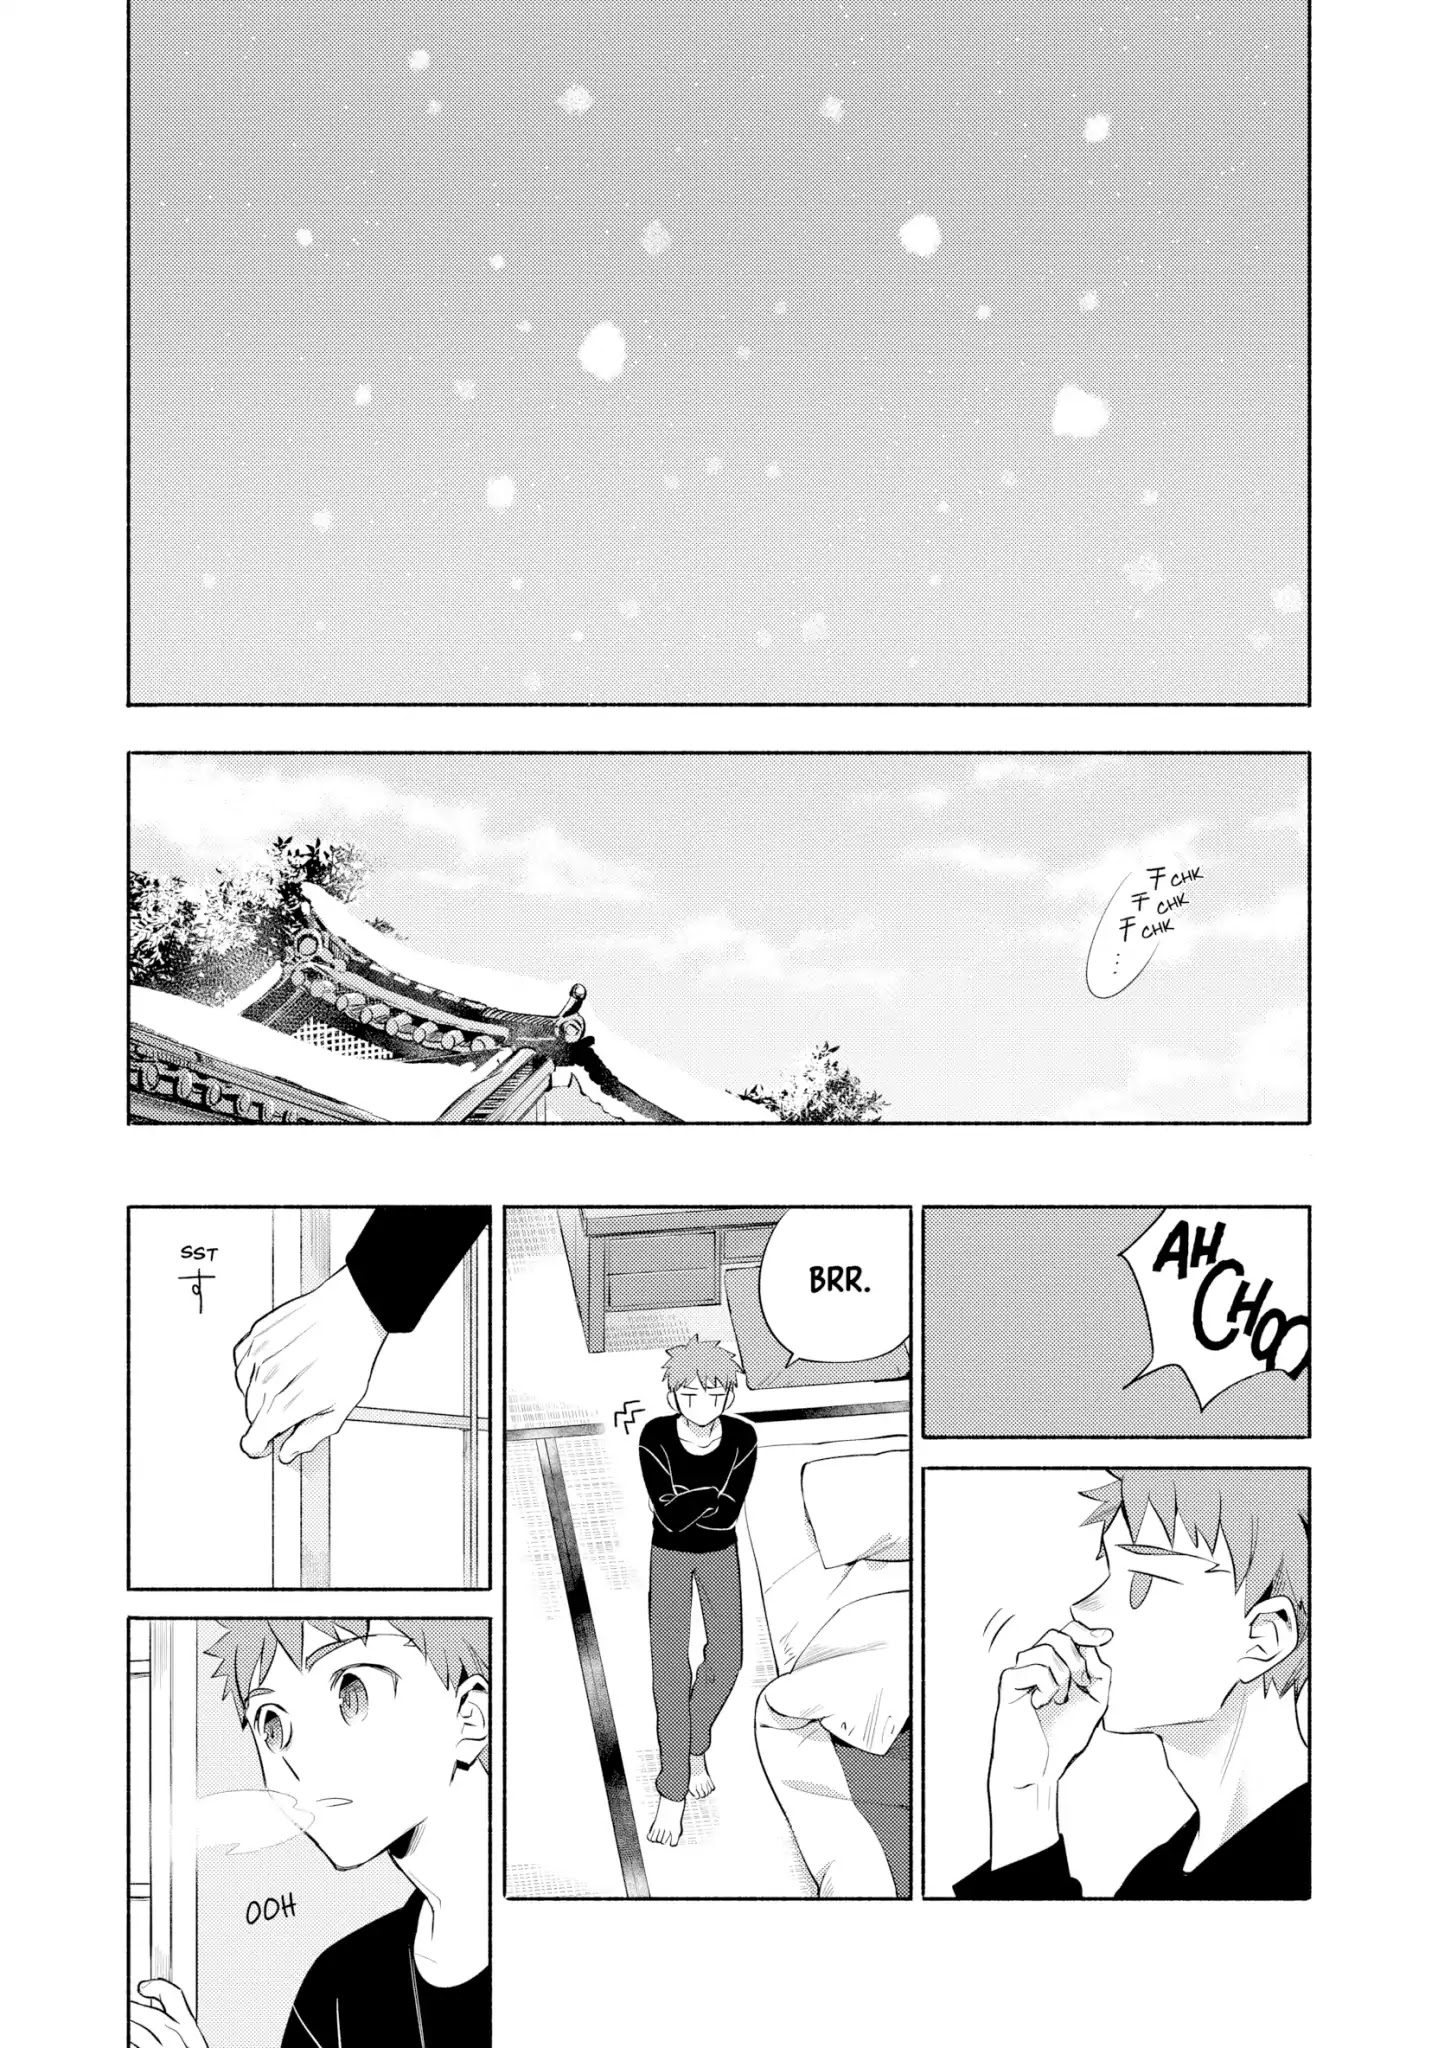 What's Cooking at the Emiya House Today? Chapter 12: Winter Standards: Oden